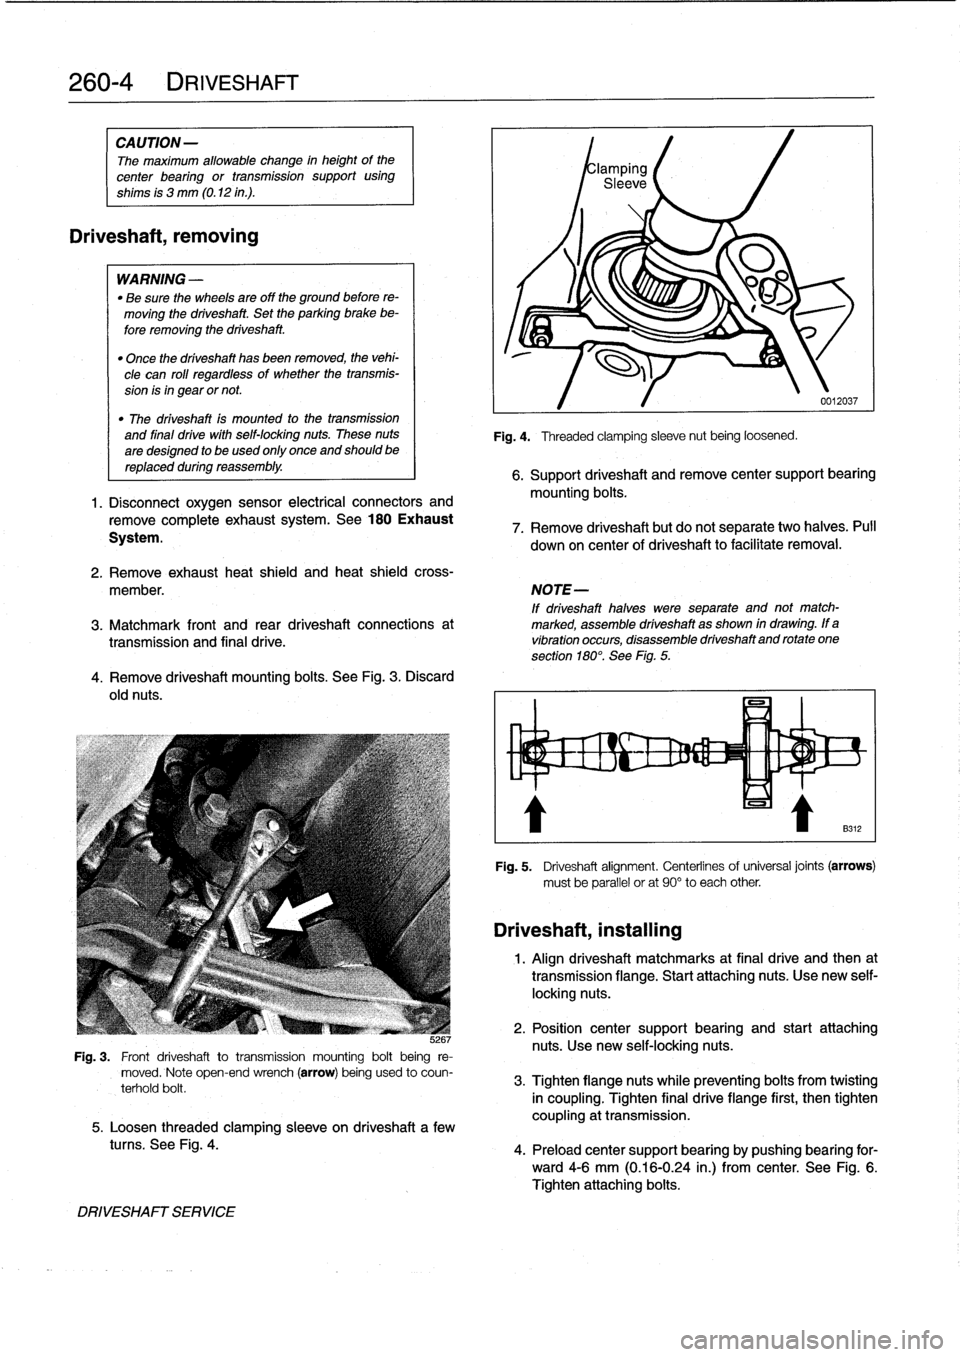 BMW 325i 1996 E36 Workshop Manual 
260-
4
DRIVESHAFT

CAUTION
-

The
maximum
allowable
change
in
height
of
the

center
bearing
or
transmission
support
using

shims
is
3
mm
(0
.12
in
.)
.

Driveshaft,
removing

WARNING
-

"
Be
sure
the